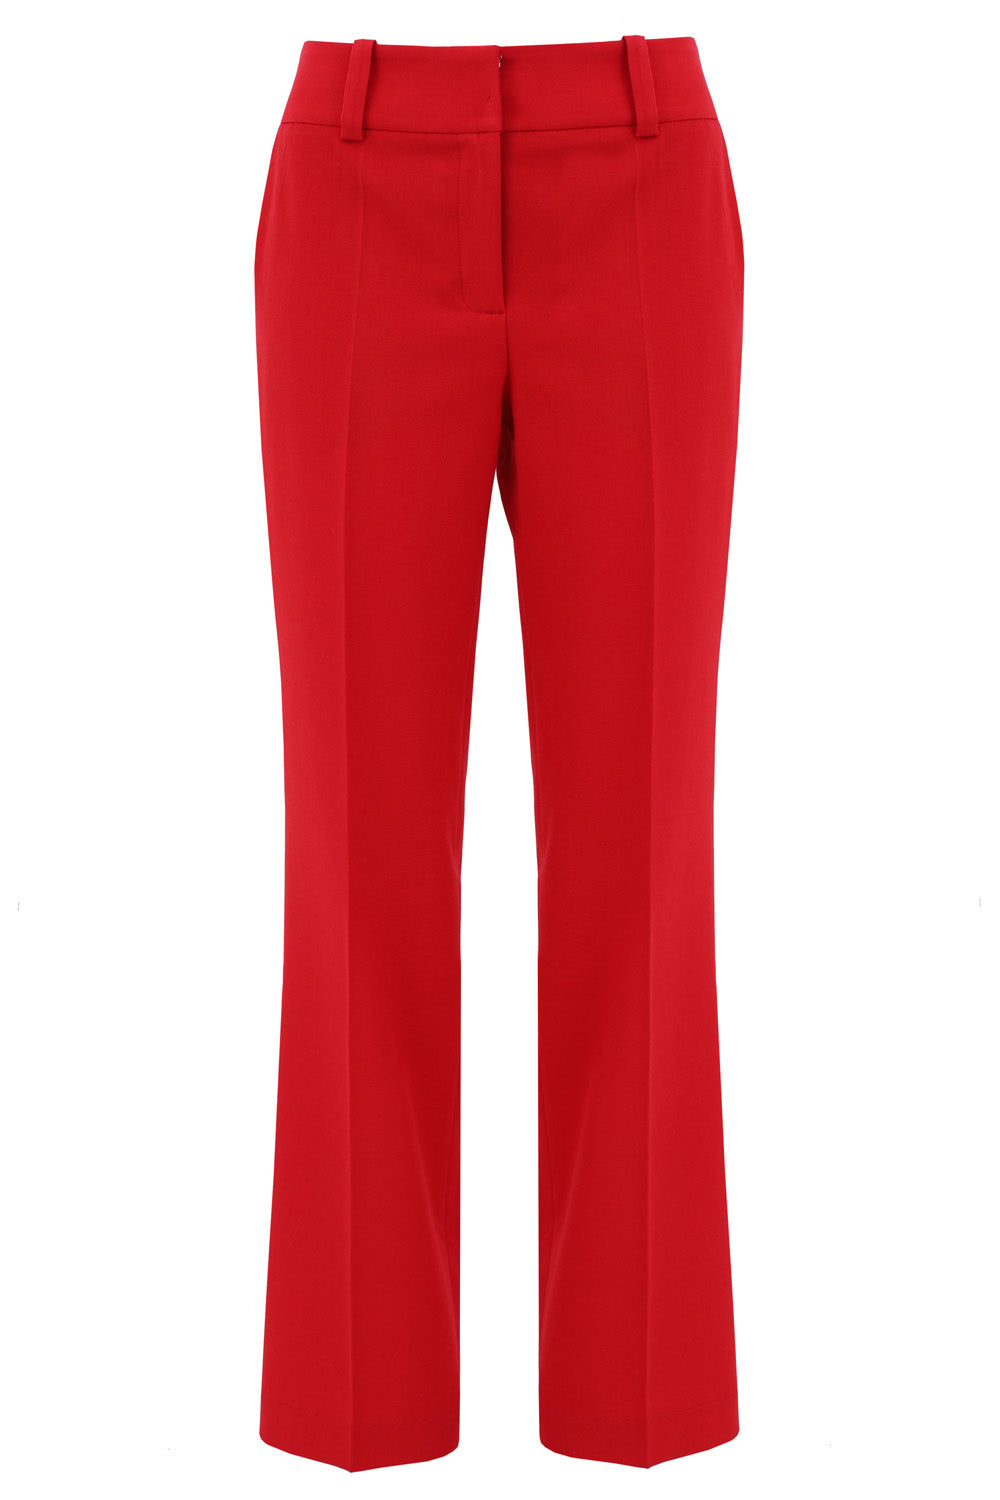 Vogue Pants Red